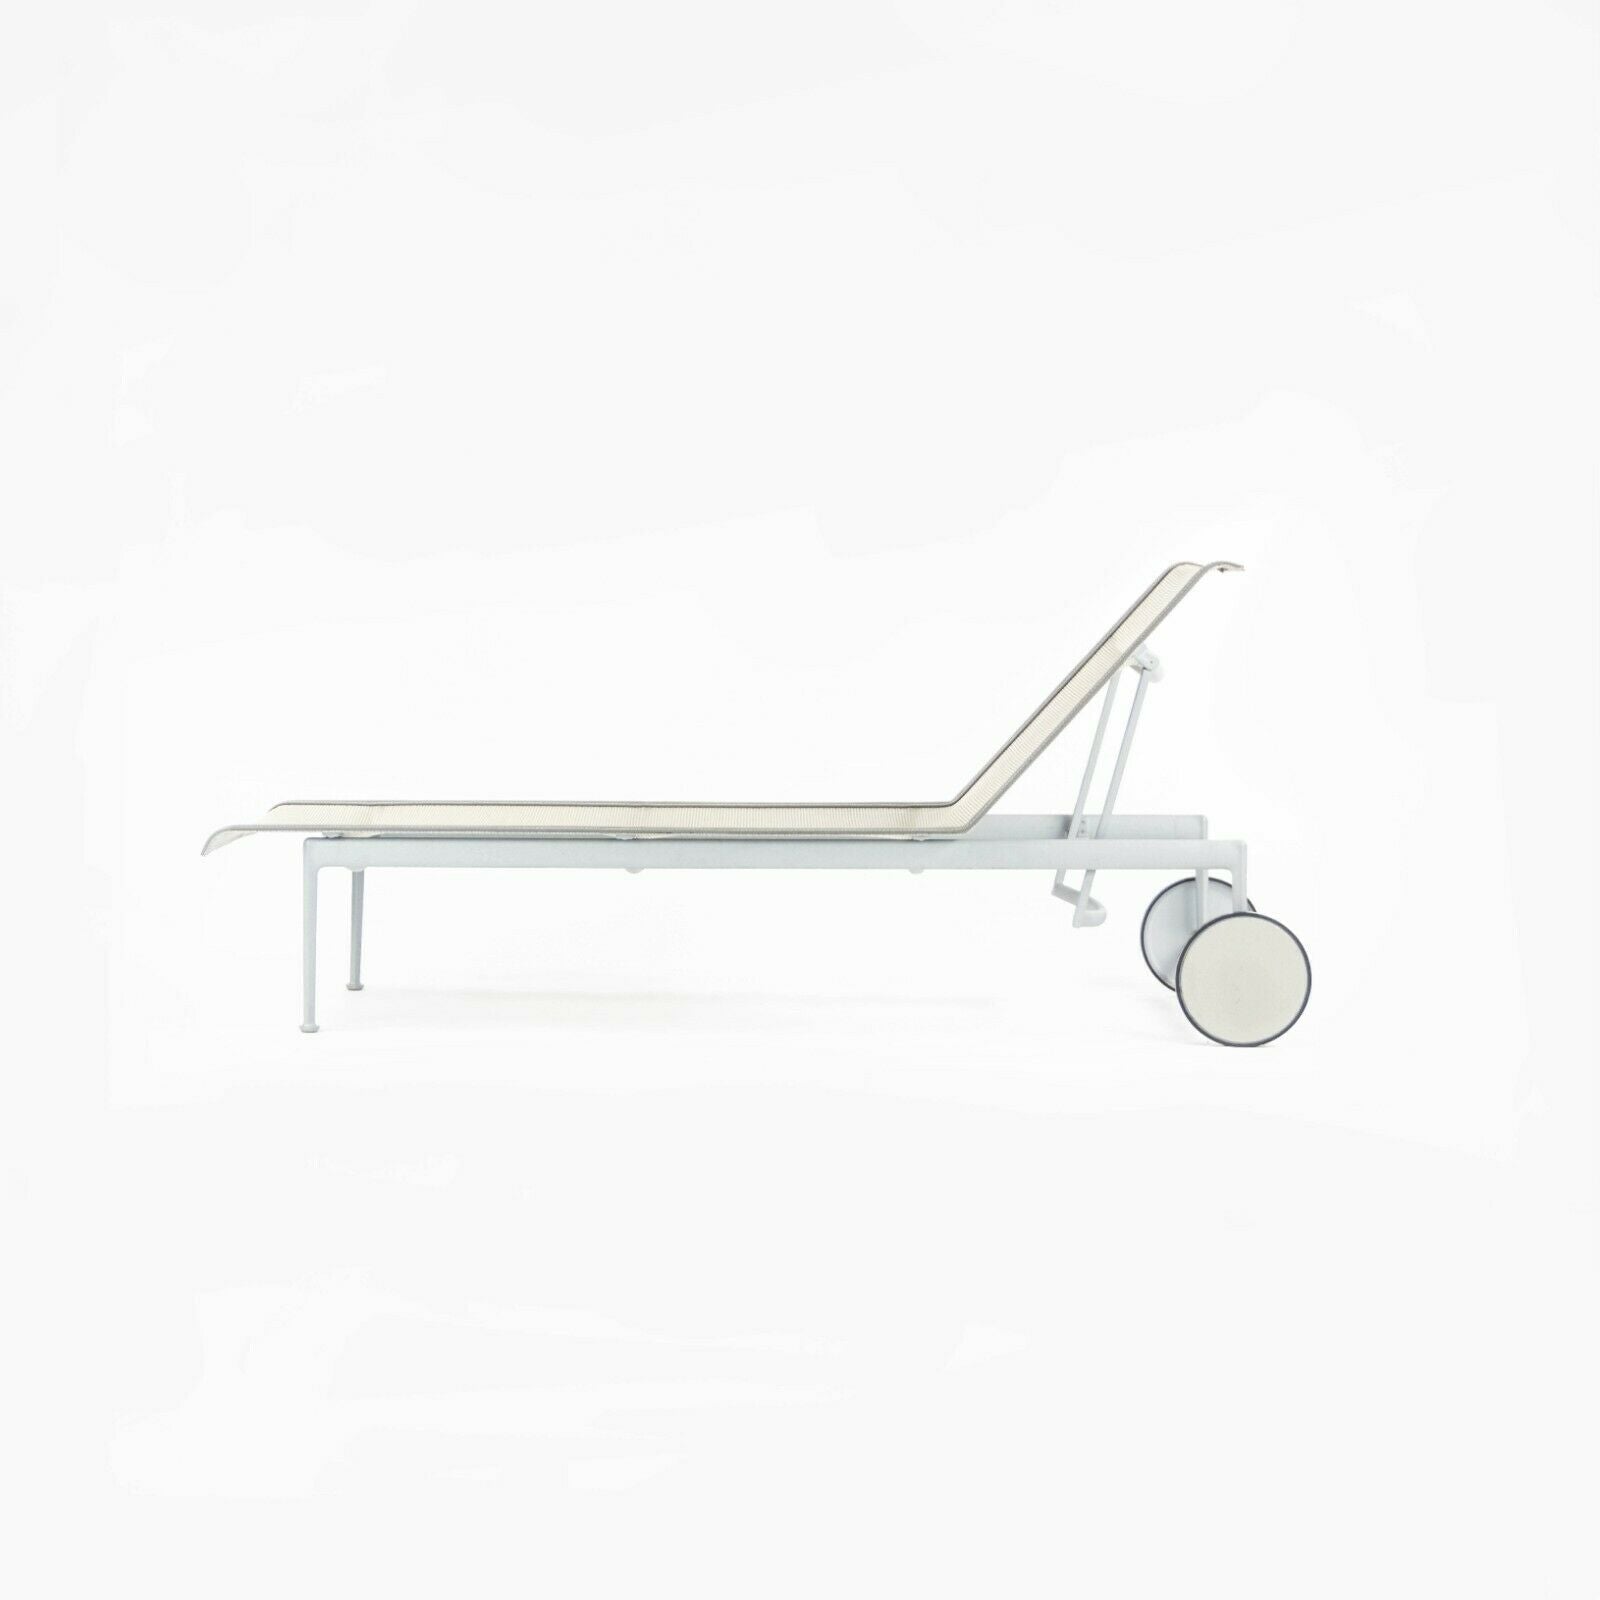 1966 Series Adjustable Chaise Lounge Chair